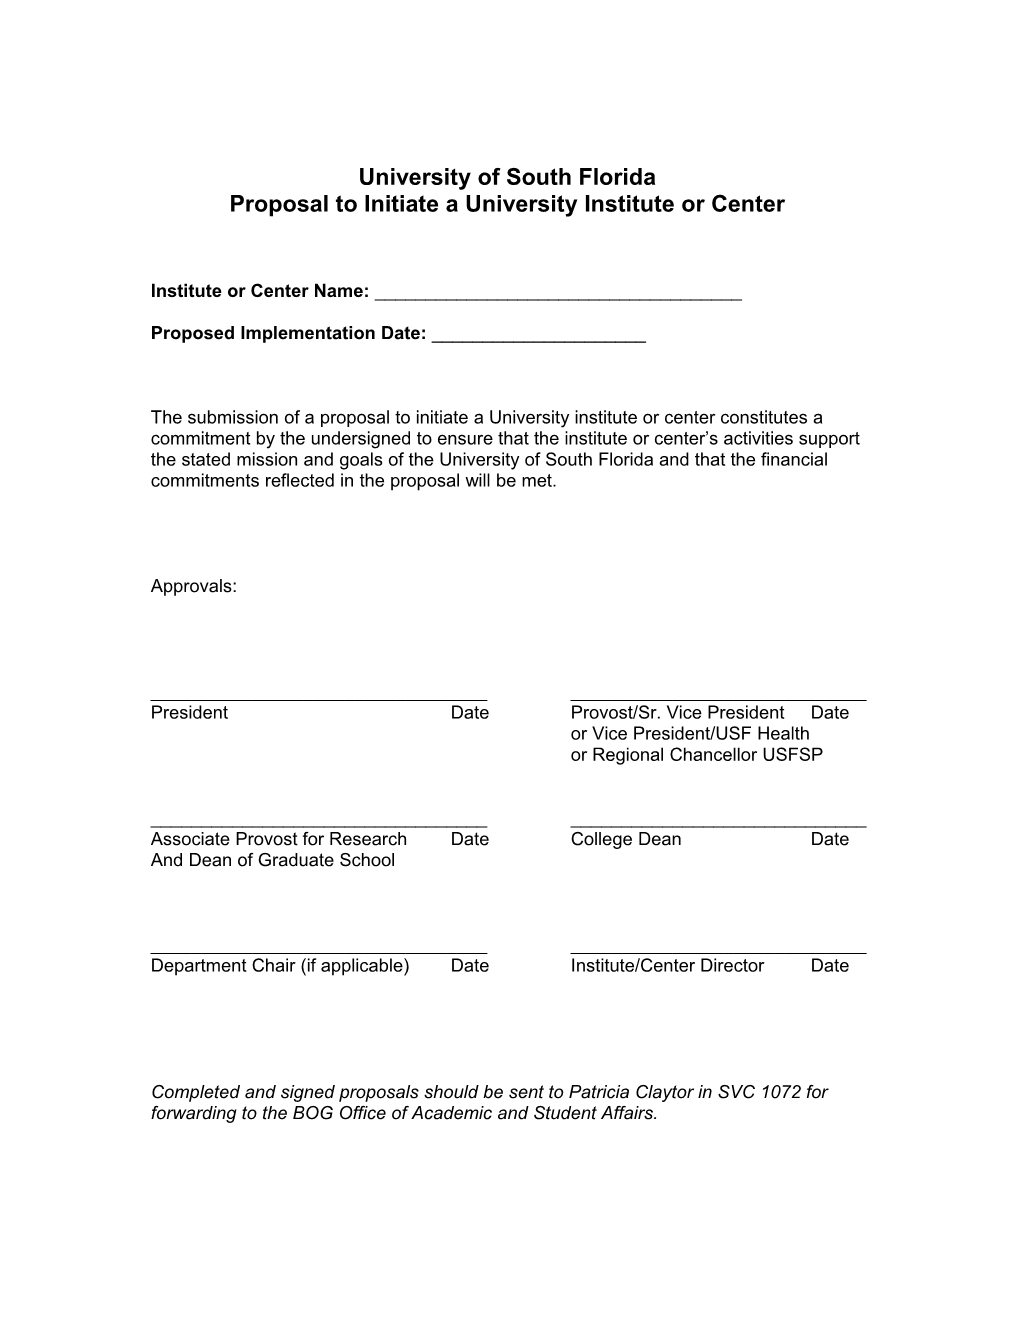 Proposal to Initiate a University Institute Or Center